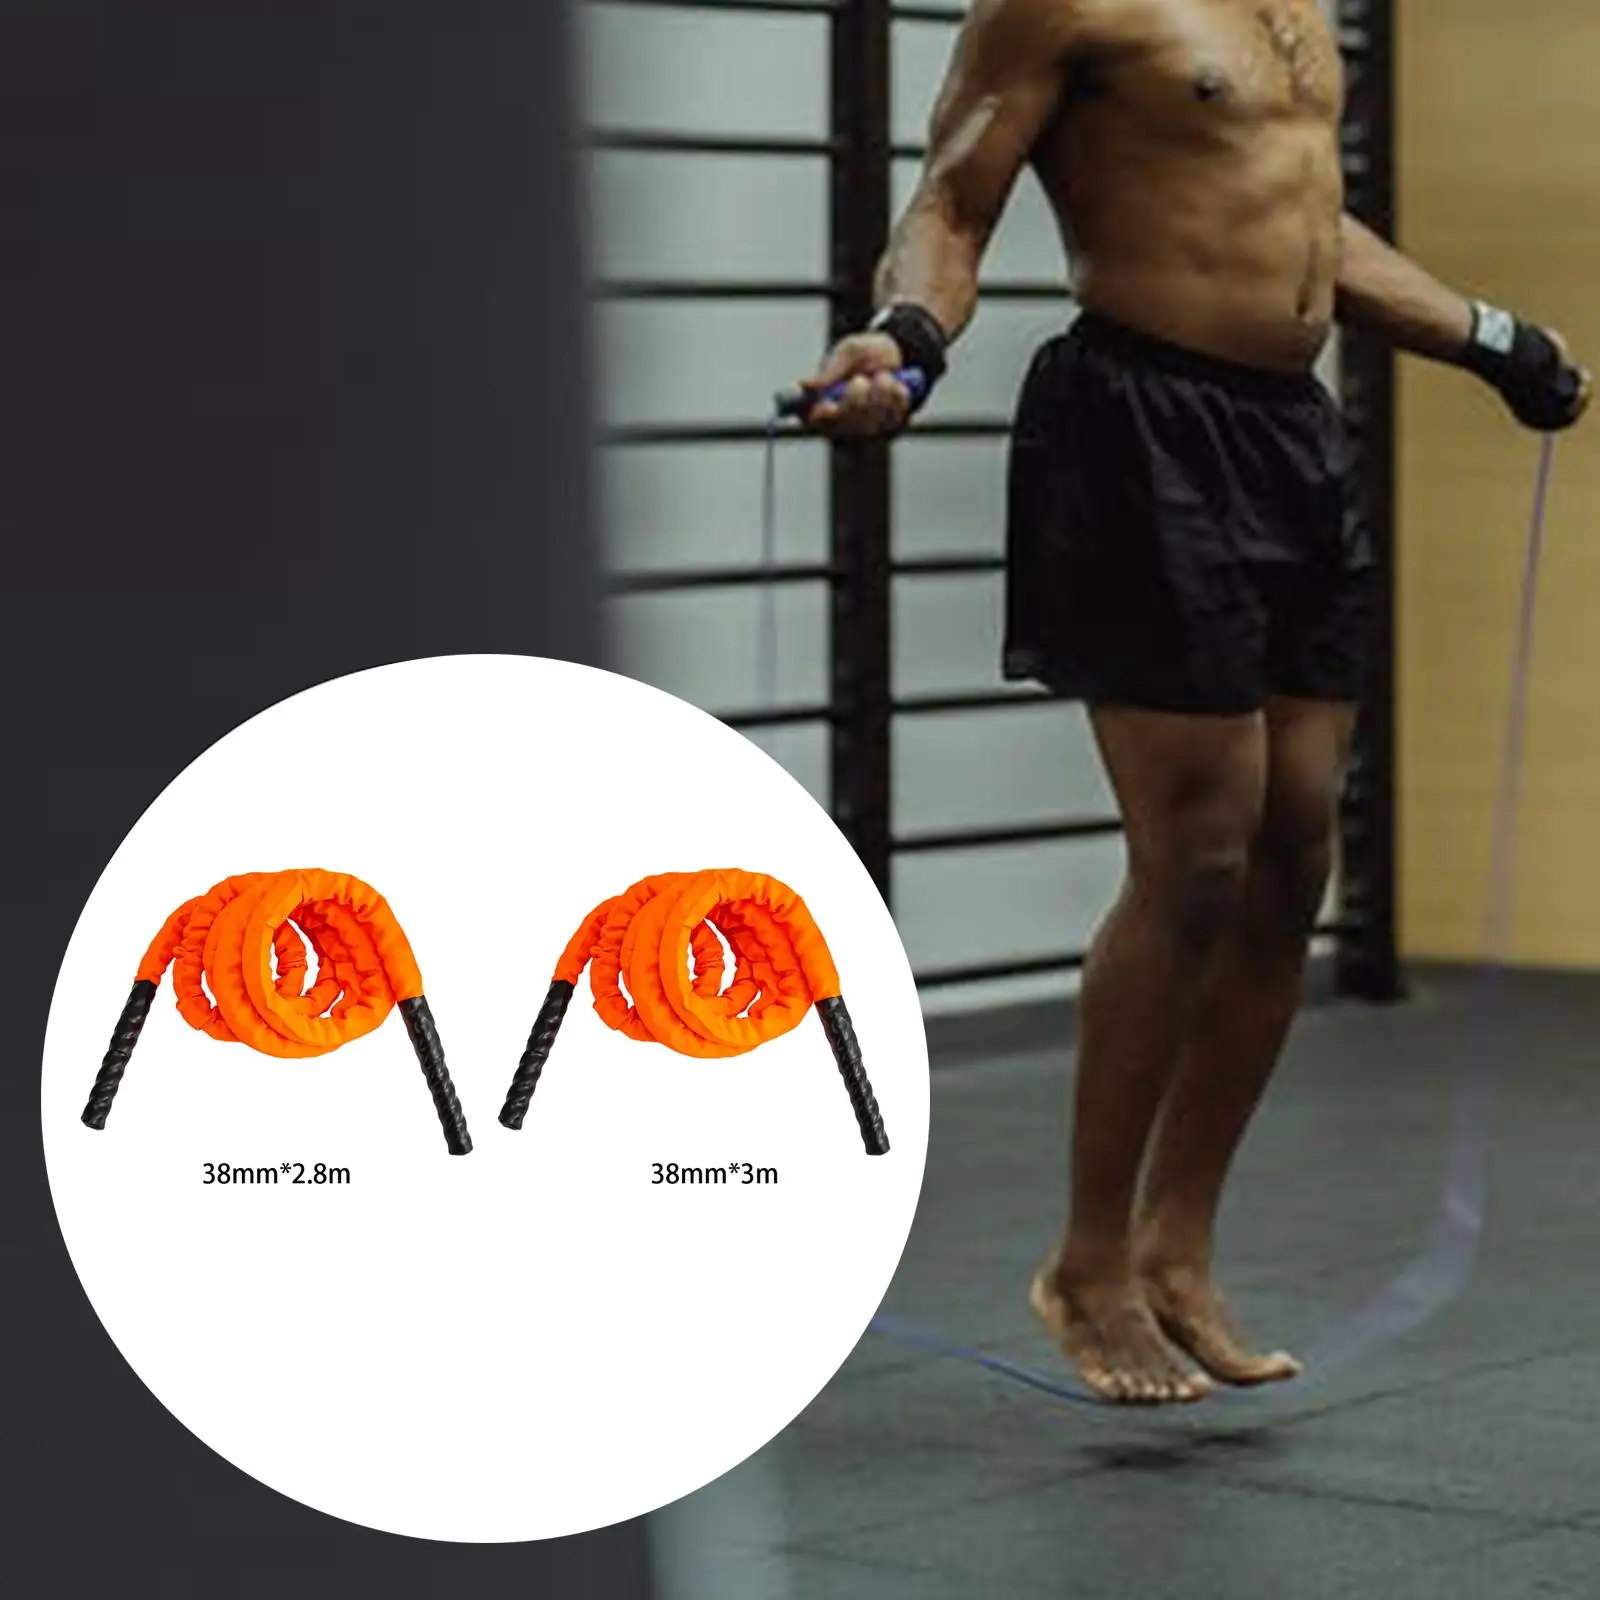   Weighted Skipping Rope Exercise  for , tal  Workouts,  Strength Building Muscle